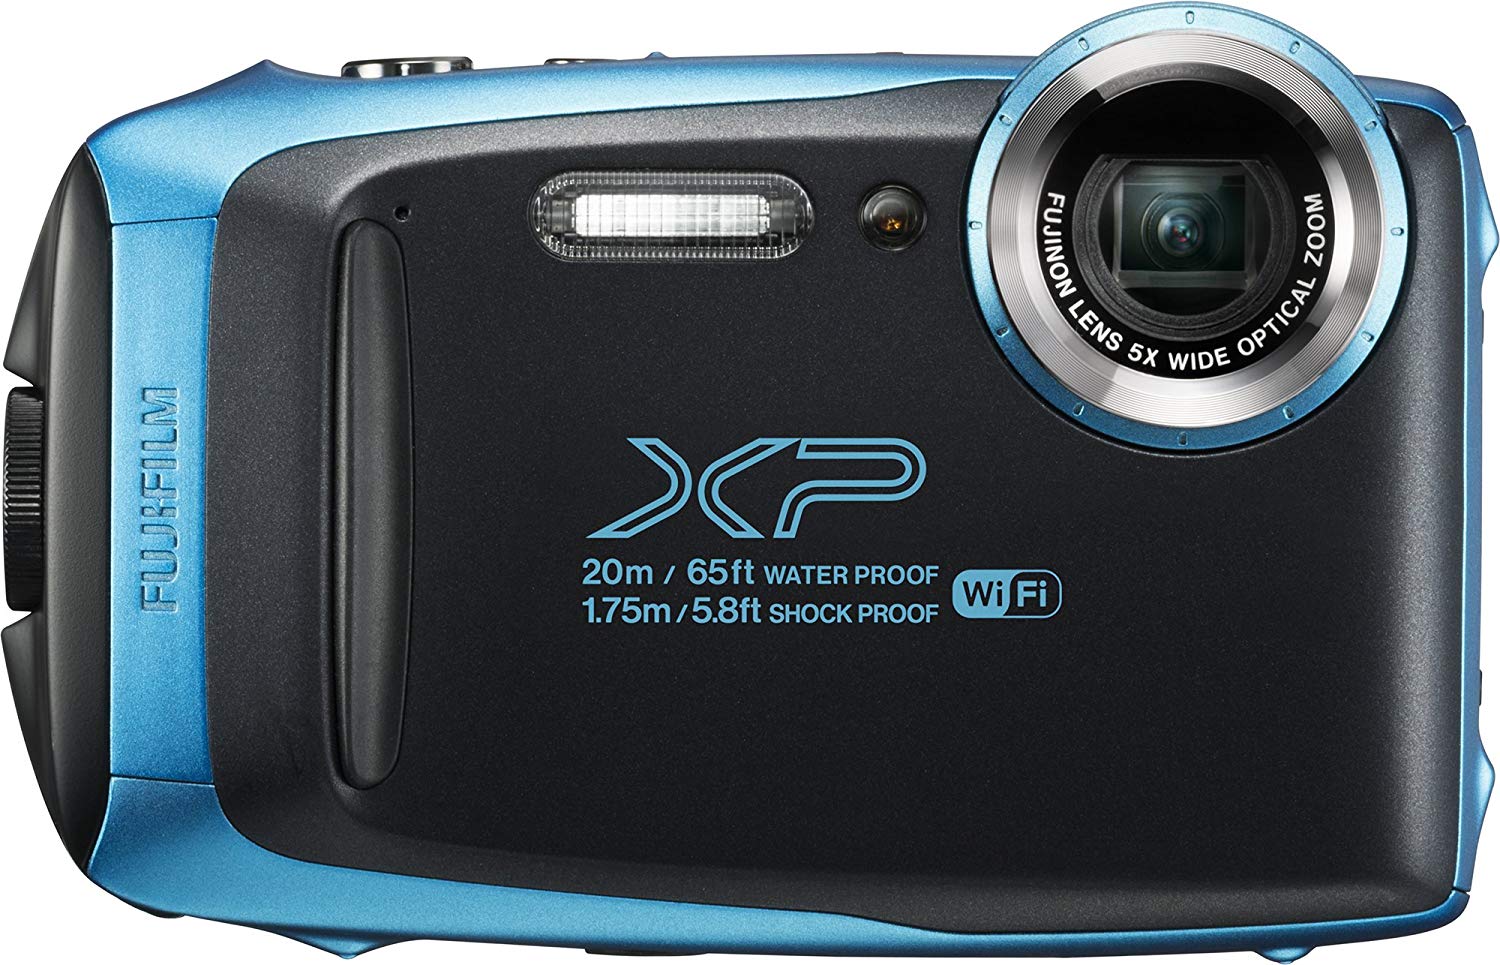 Best point and shoot camera under 200 - FujiFilm FinePix